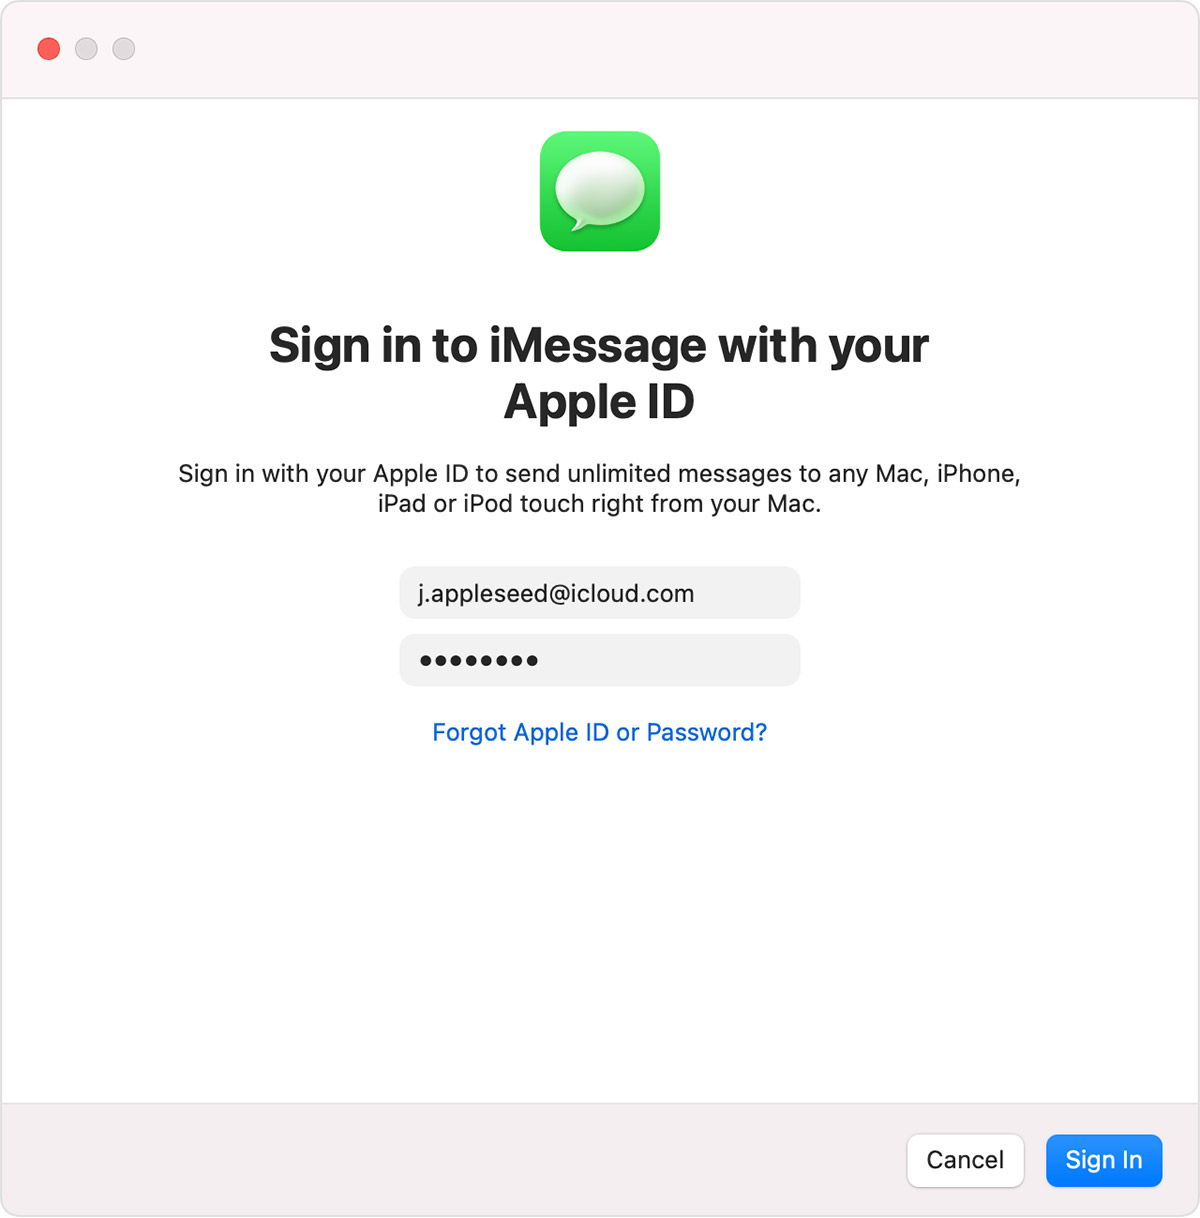 Sign-in to iMessage window